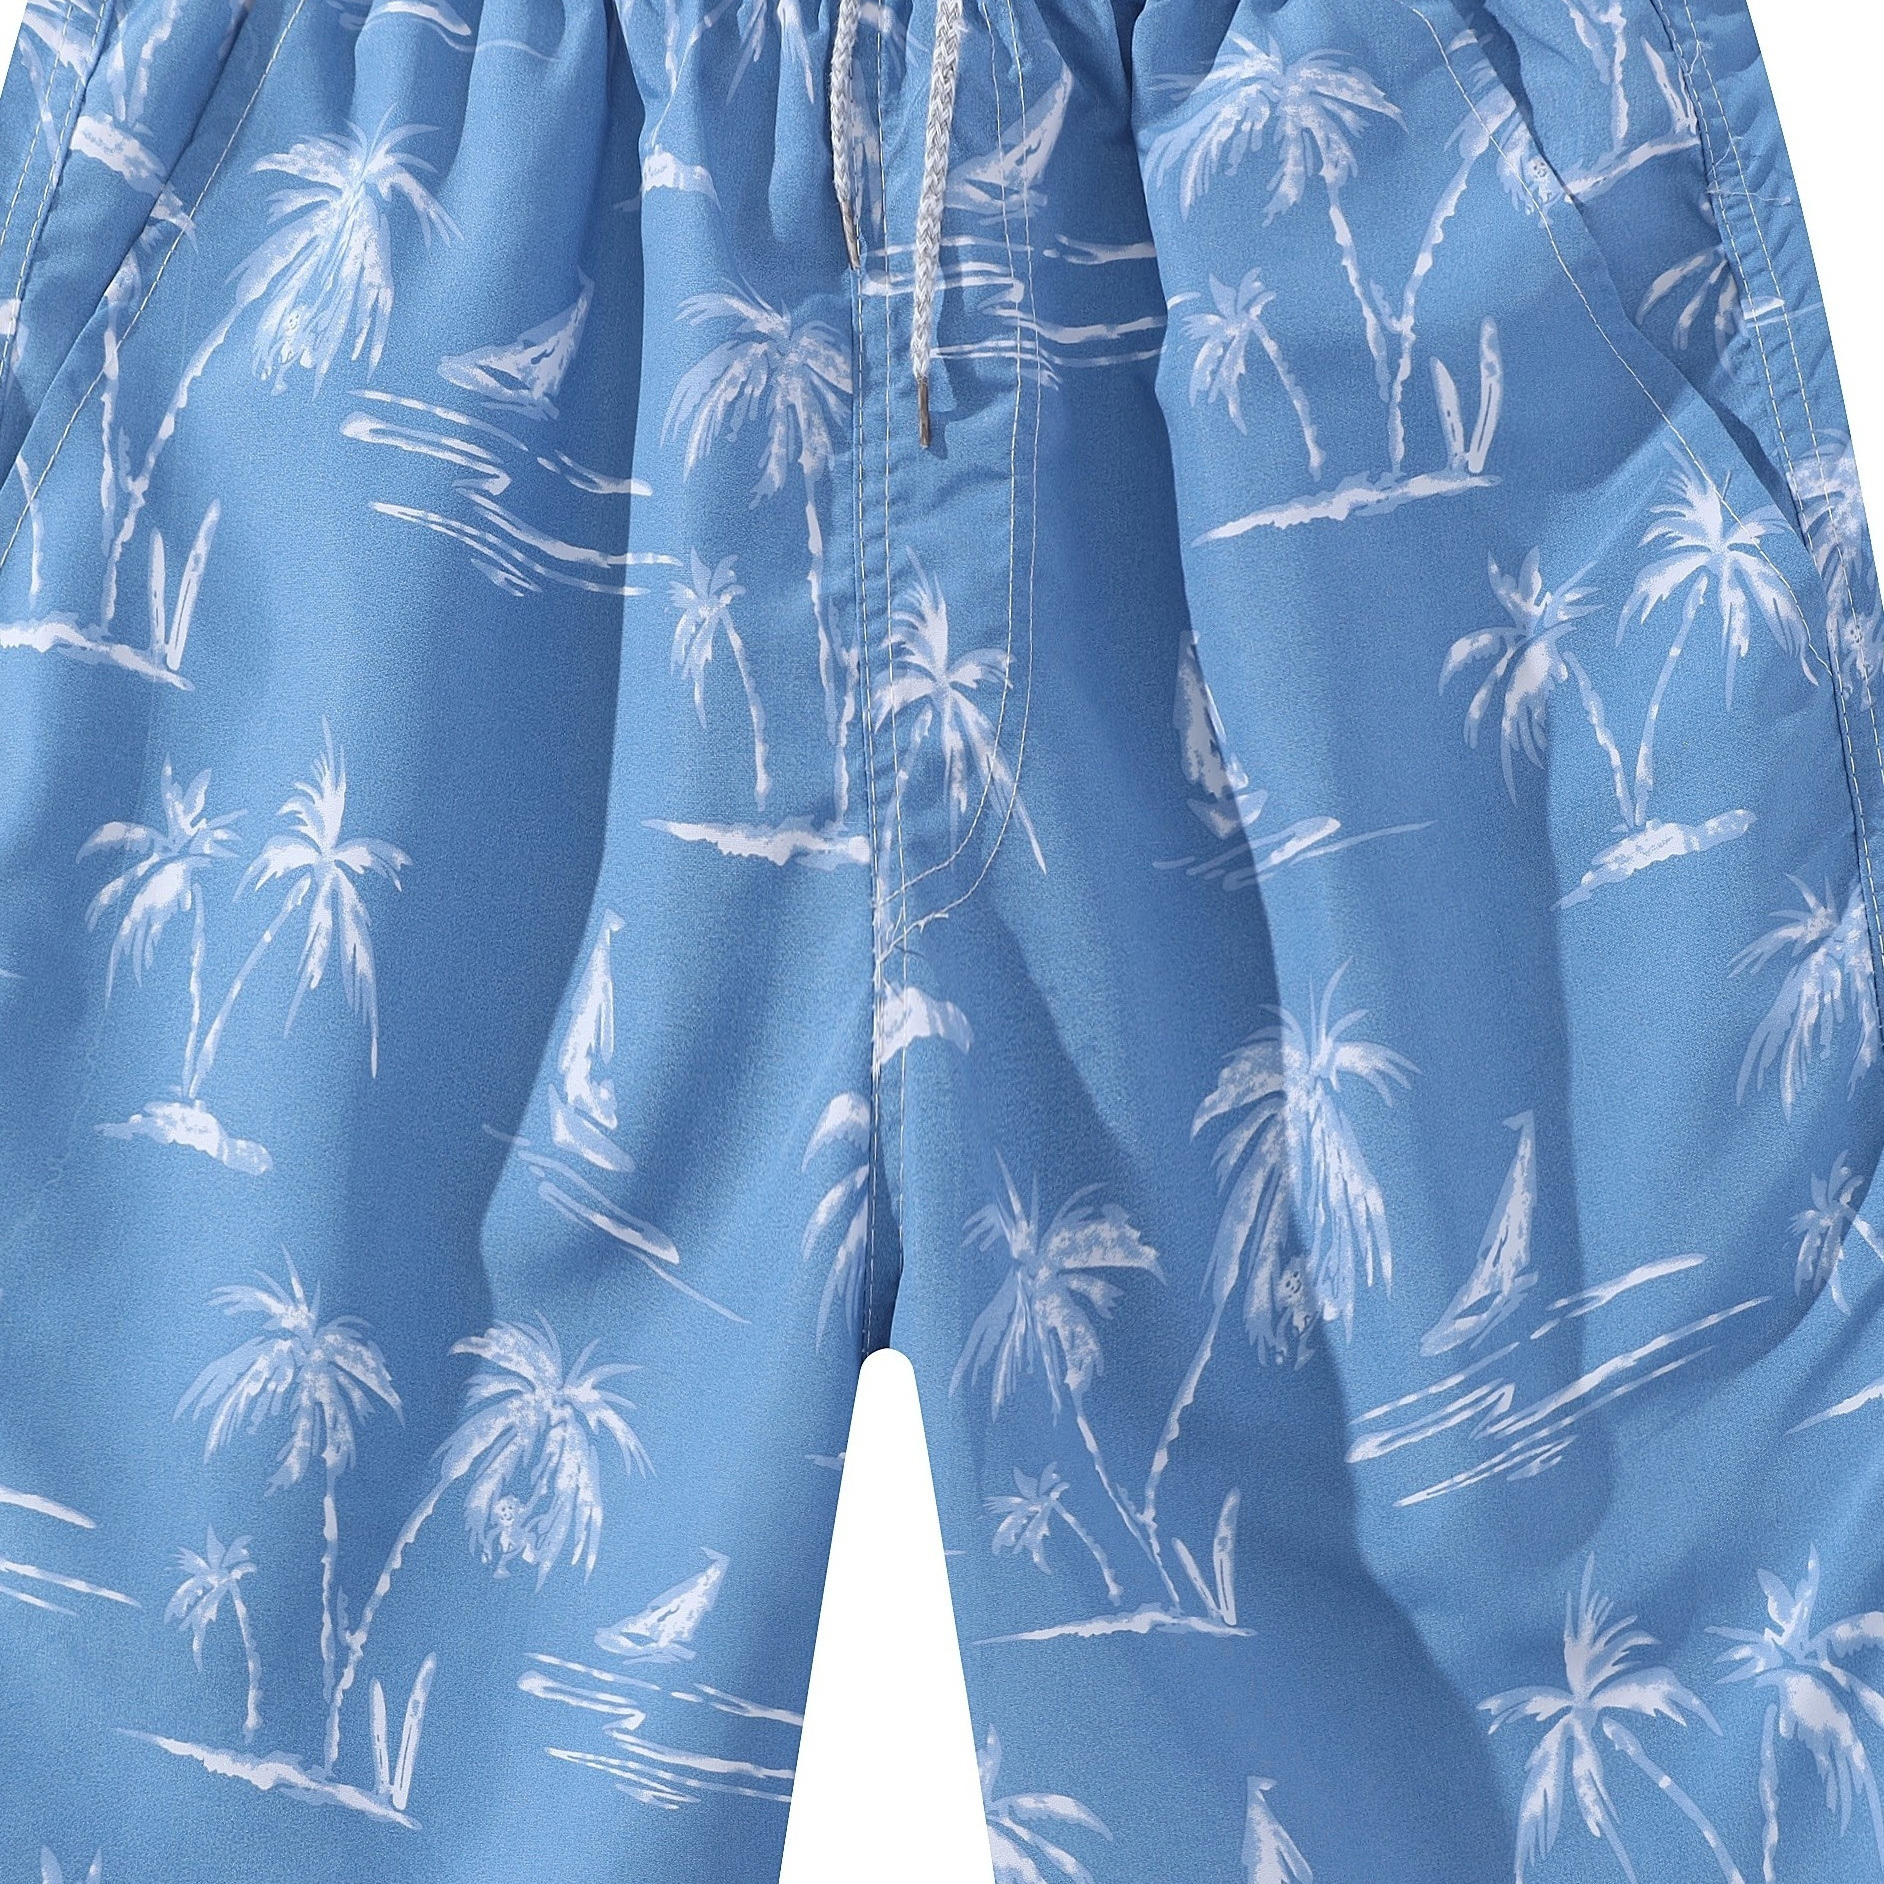 

Coconut Tree And Sailboat Pattern Board Shorts With Drawstring And Pockets, Quick Dry And Comfy Shorts For Men's Summer Beach And Holiday Wear